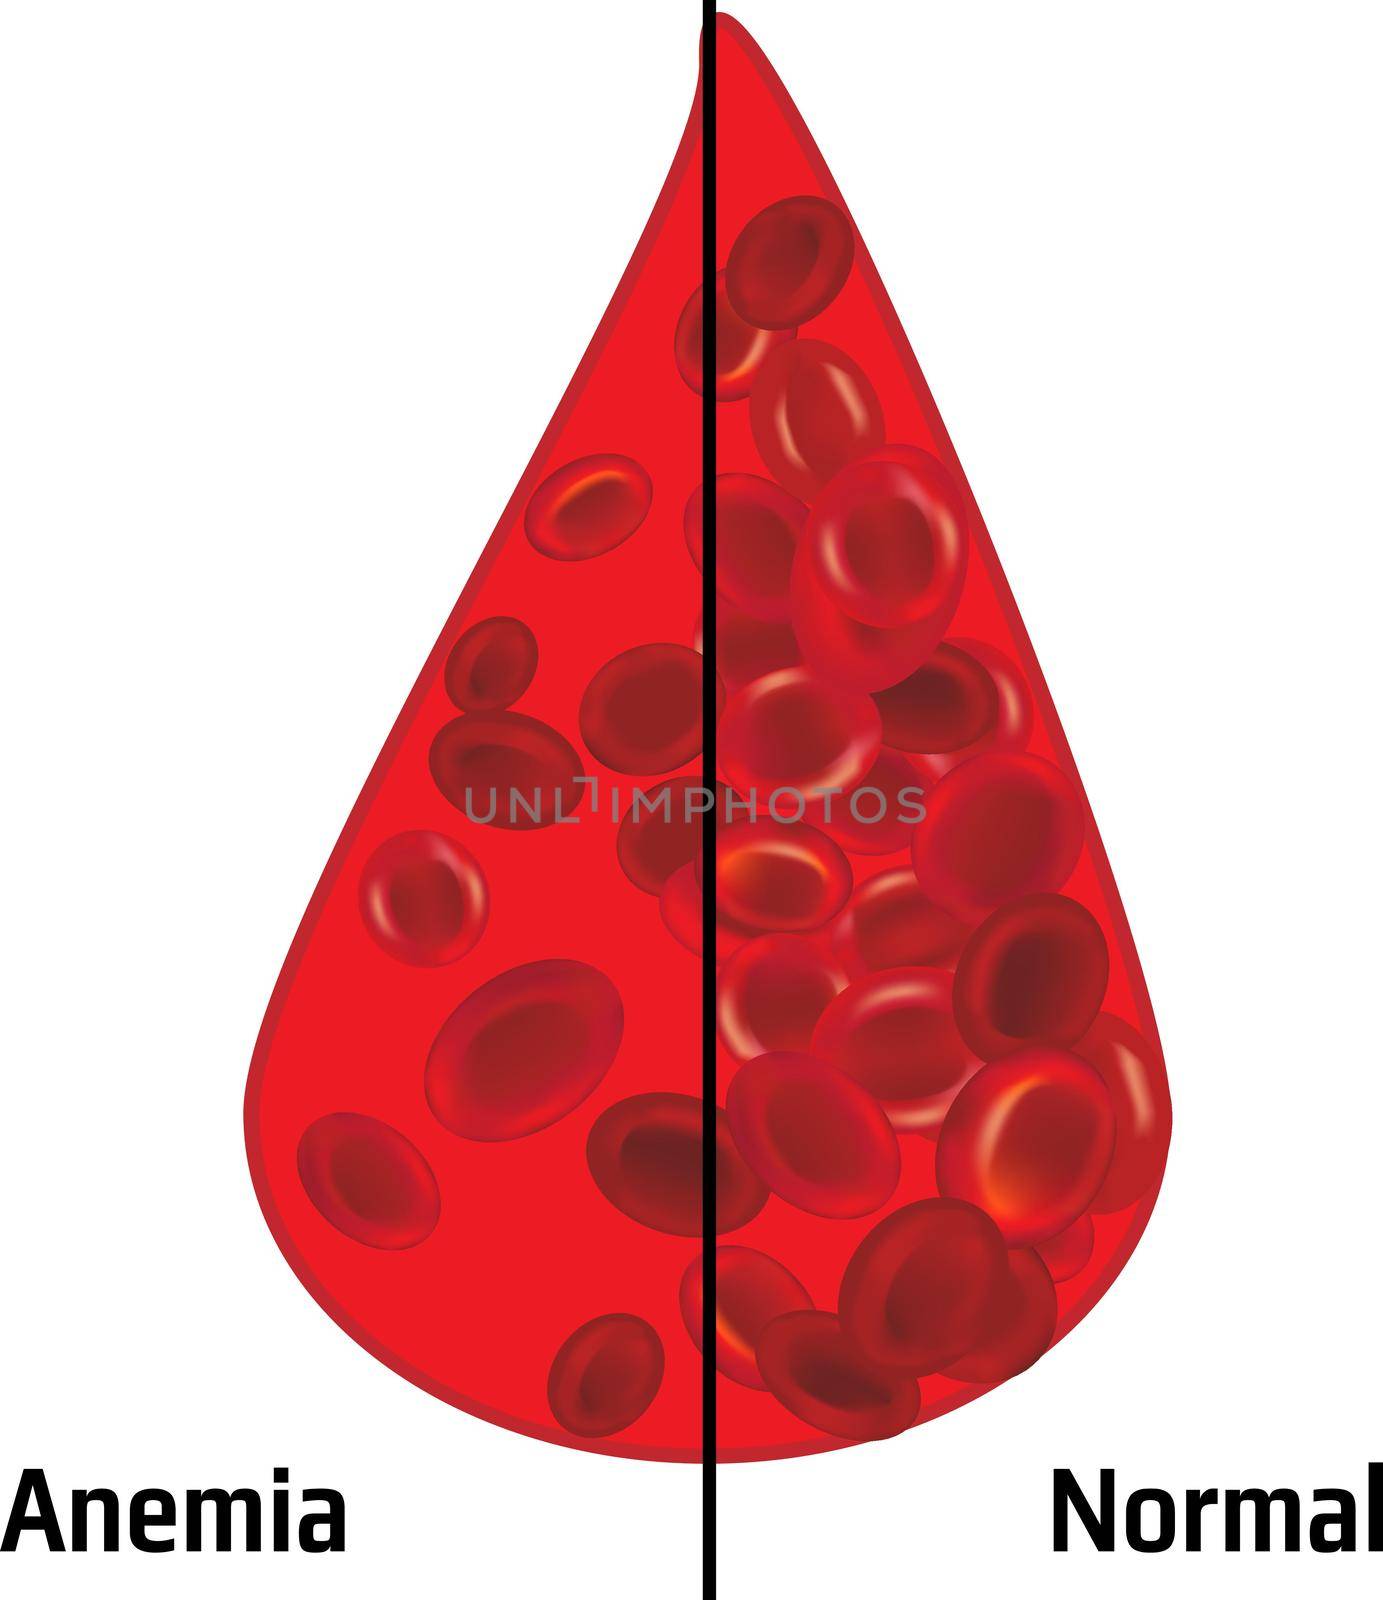 Anemia and normal ammount of red blood cells in a drop of blood vector illustration